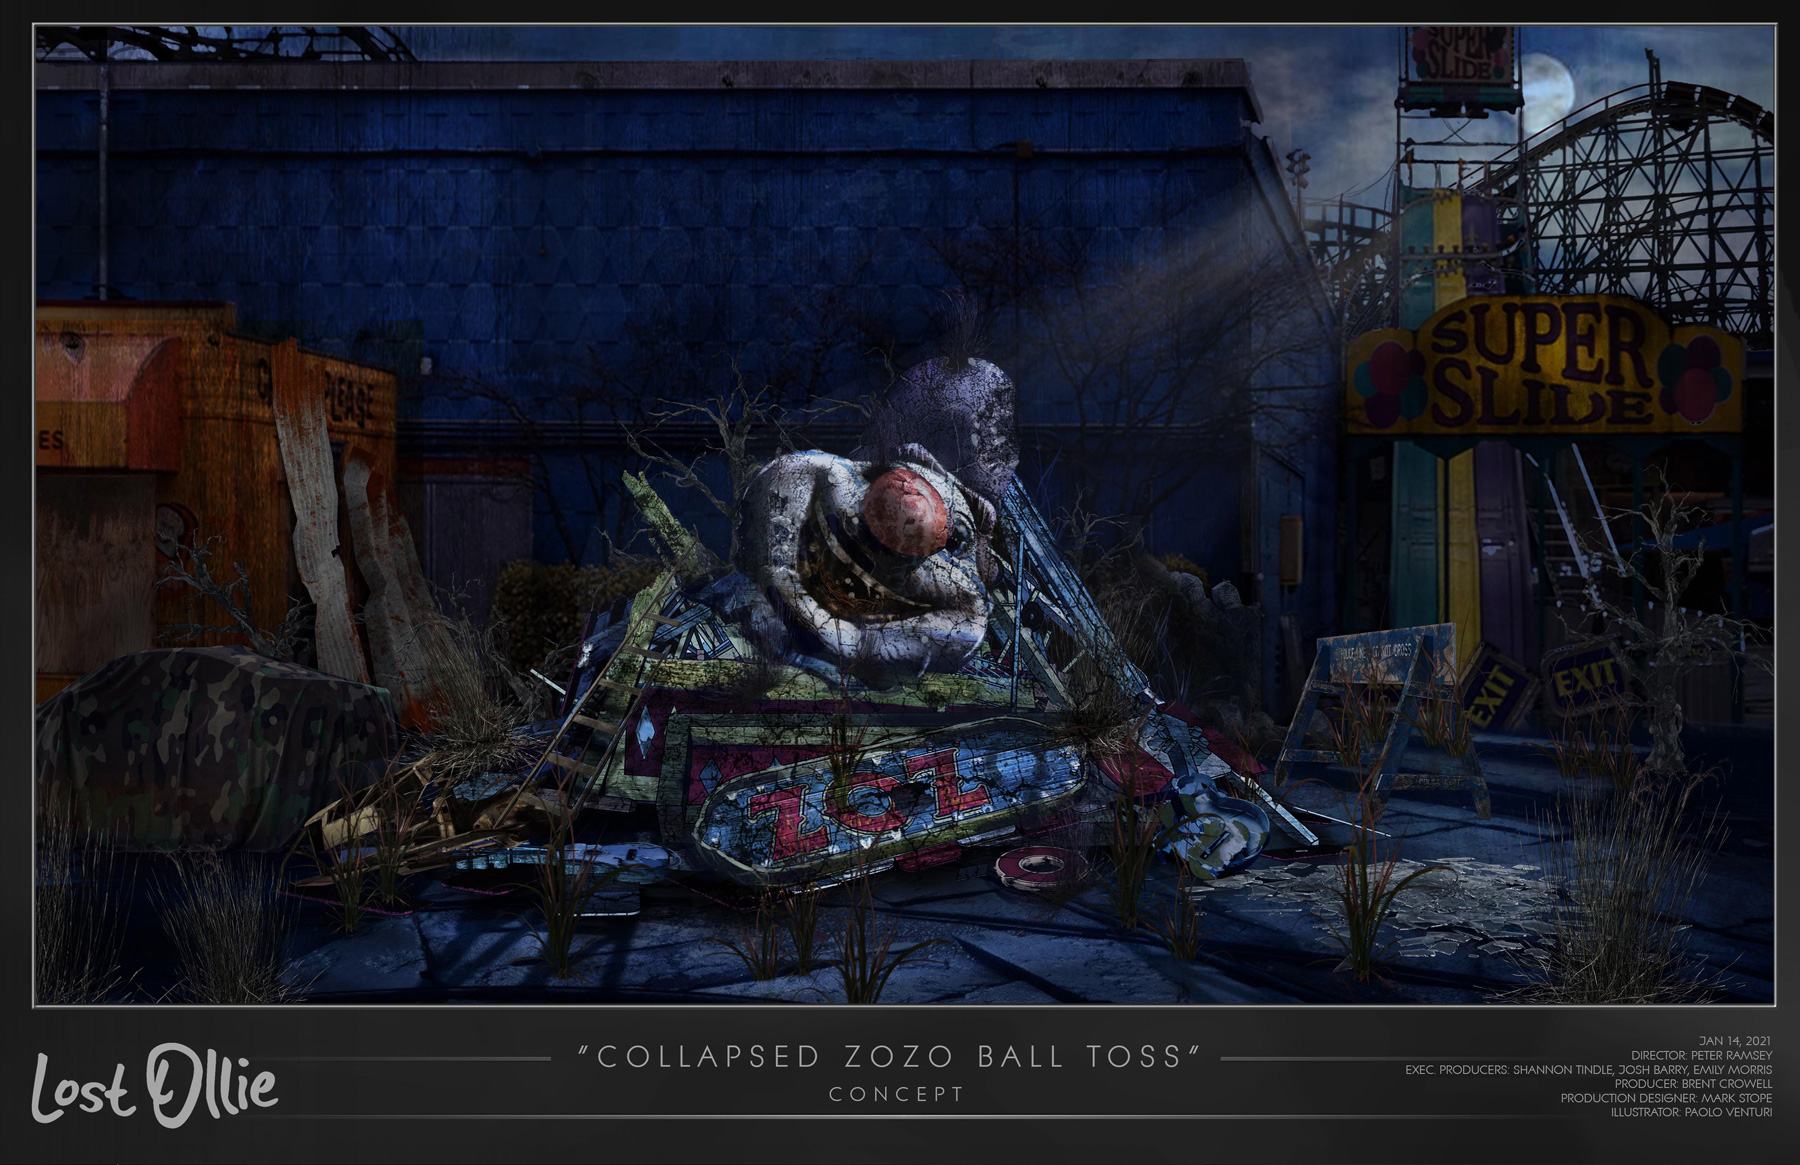 27 Lost Ollie 'Dreamland Amusement Park' Zozo's Ball Toss Booth Years Have Passed Location Install Concept Art